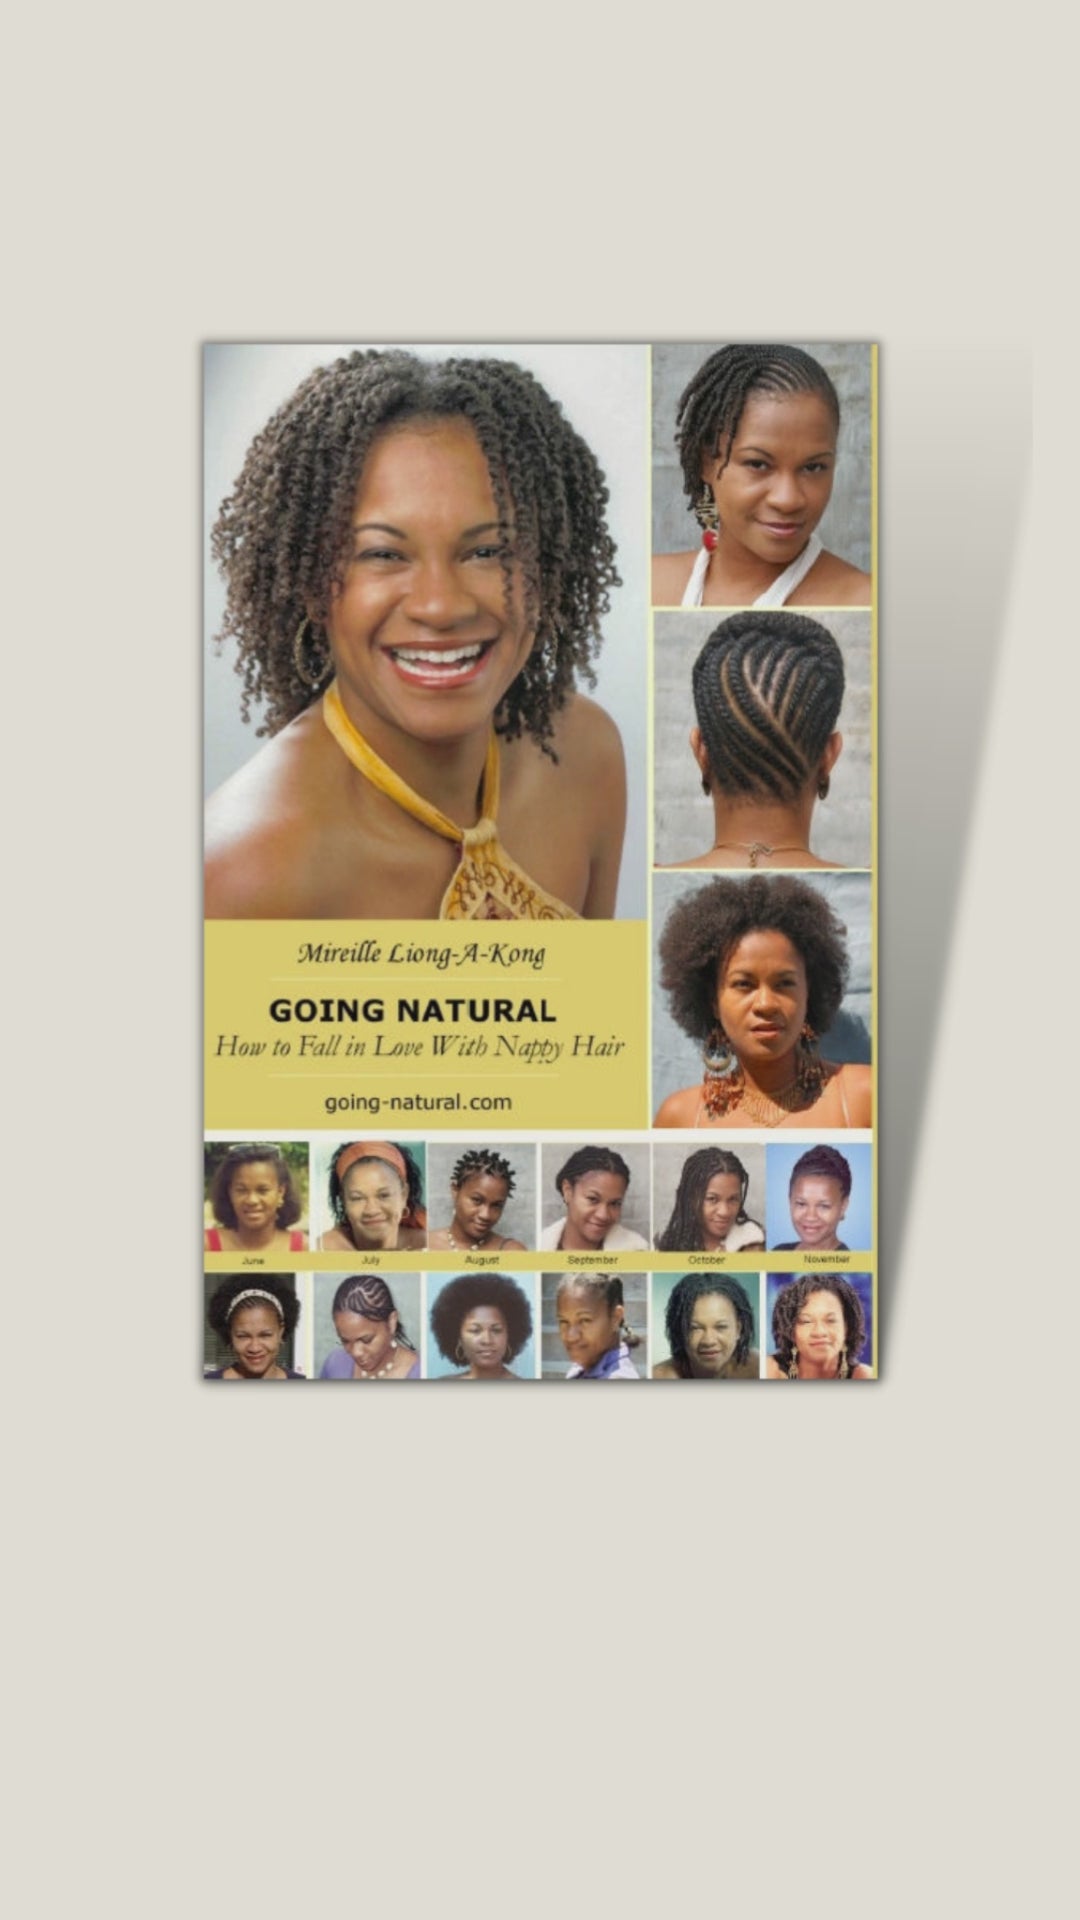 Going Natural, How to Fall in Love with Nappy Hair